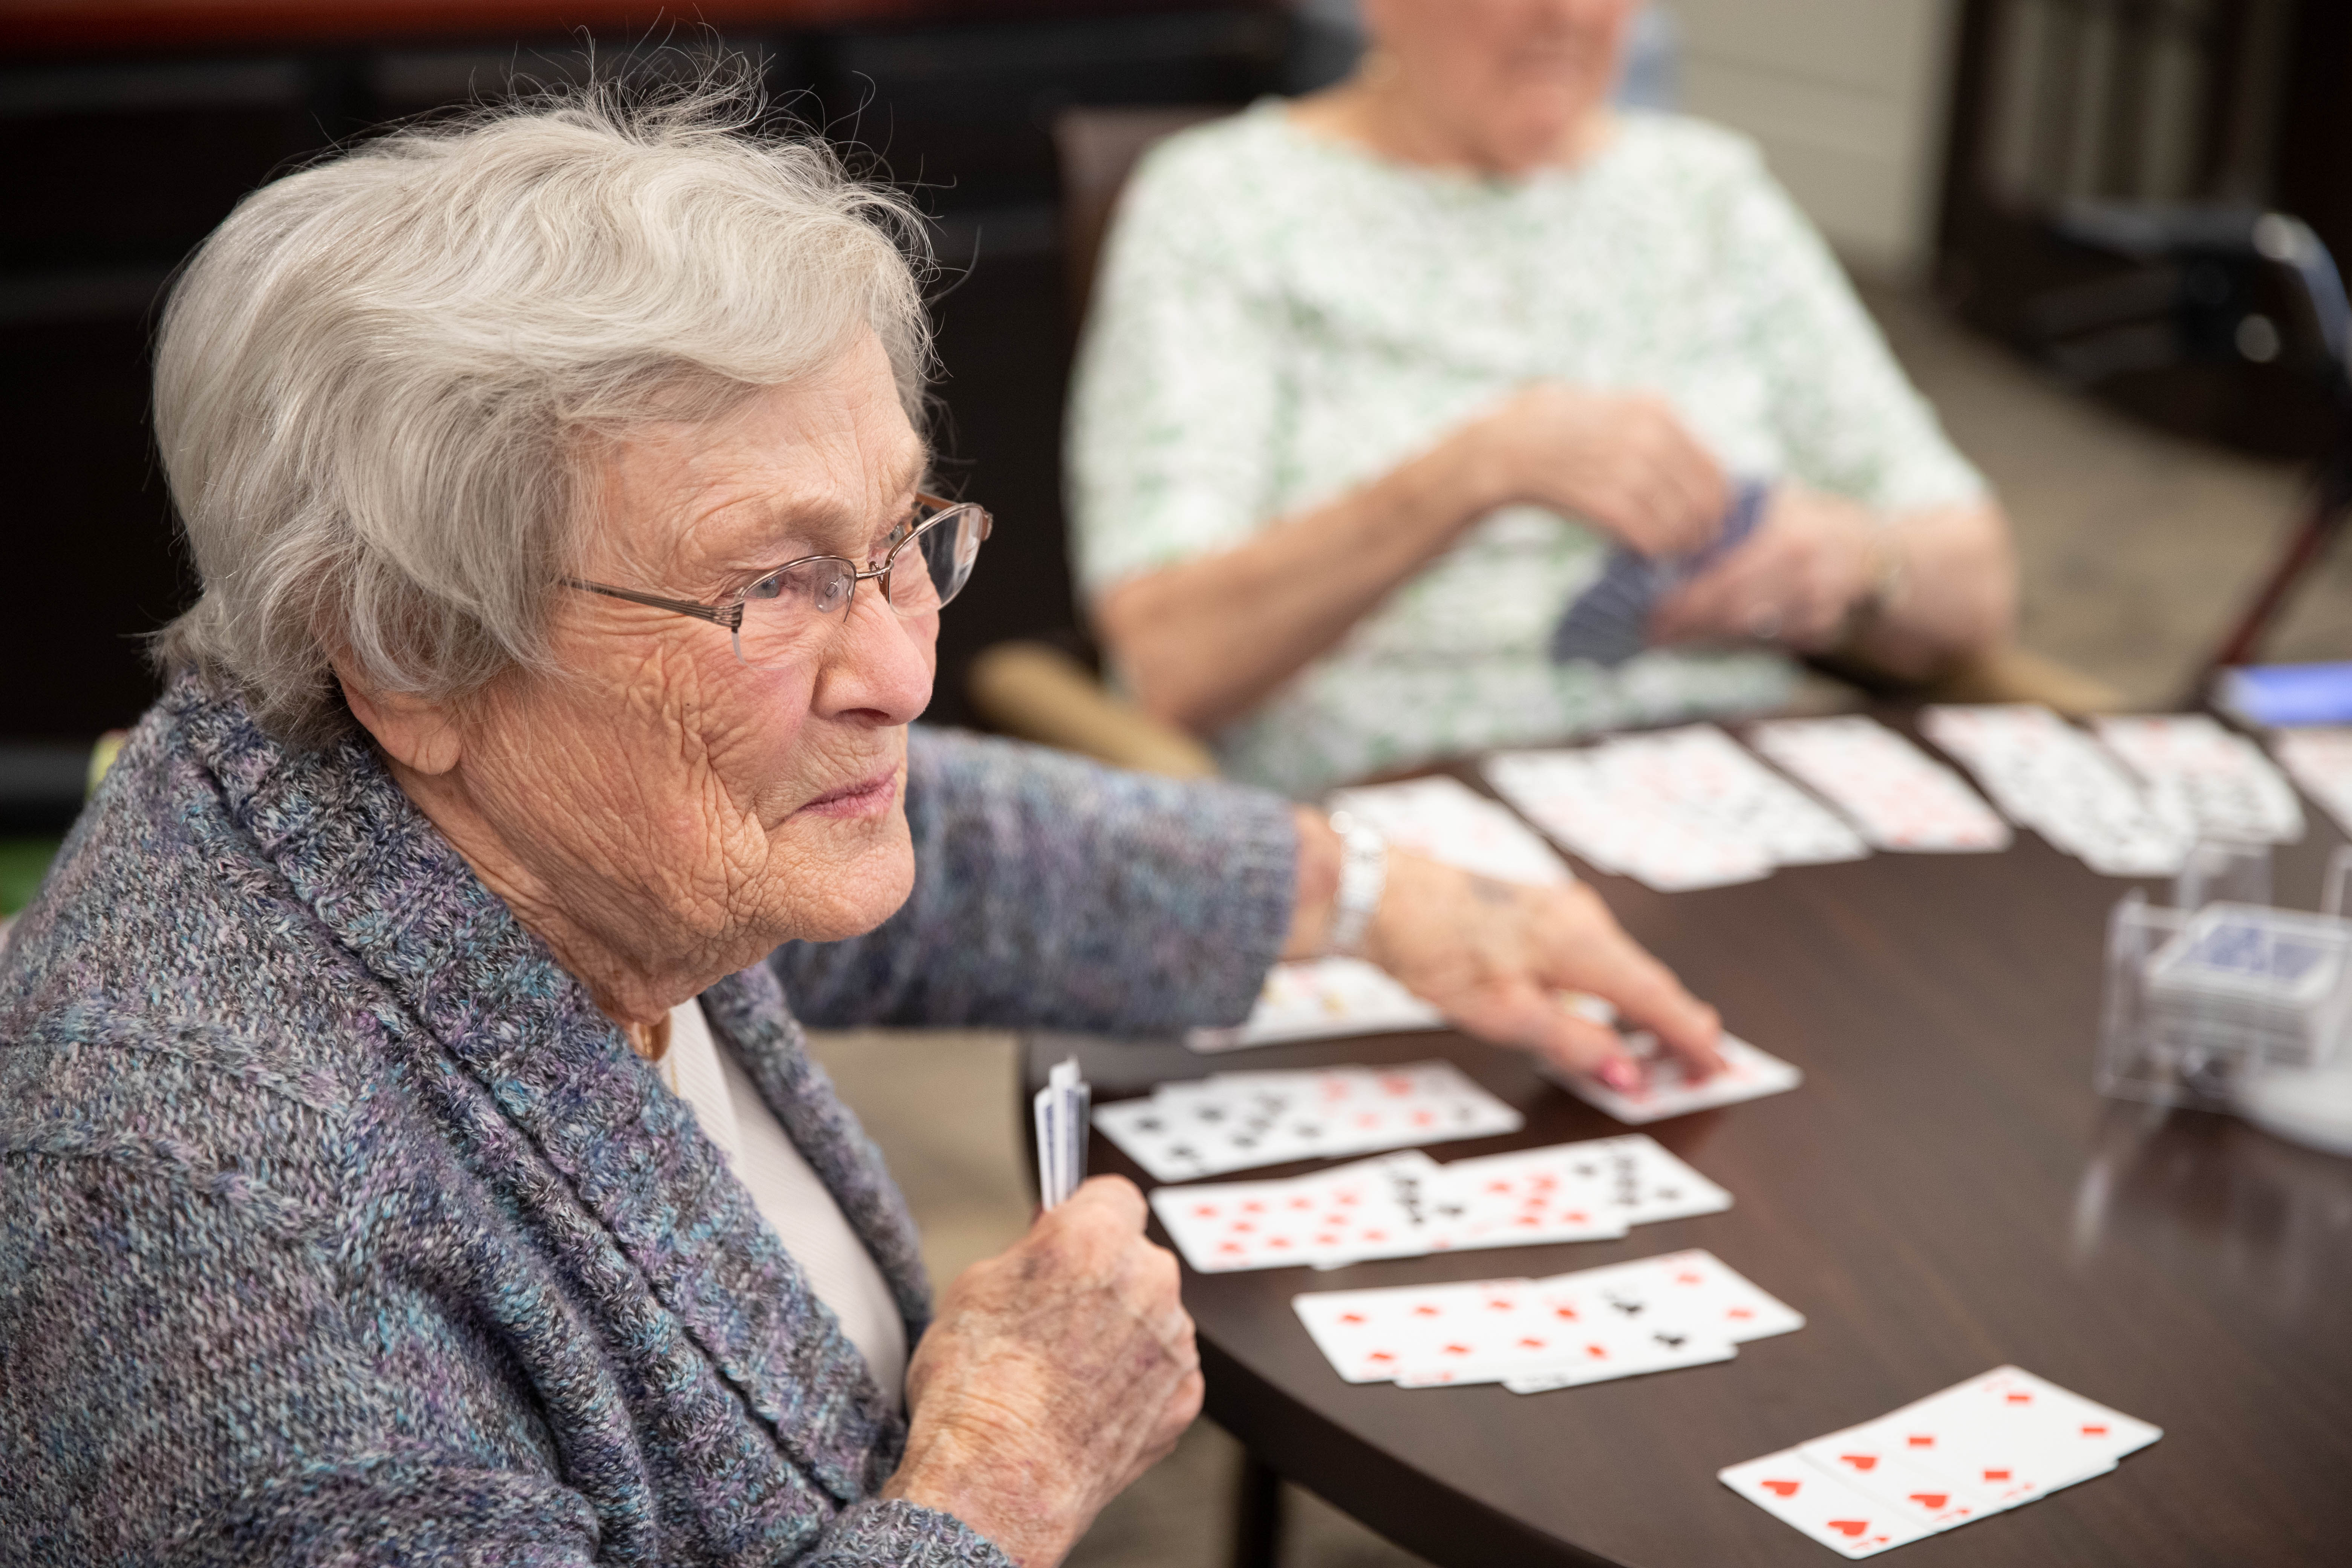 <span  class="uc_style_uc_tiles_grid_image_elementor_uc_items_attribute_title" style="color:#000000;">Residents playing cards at Aster Place</span>